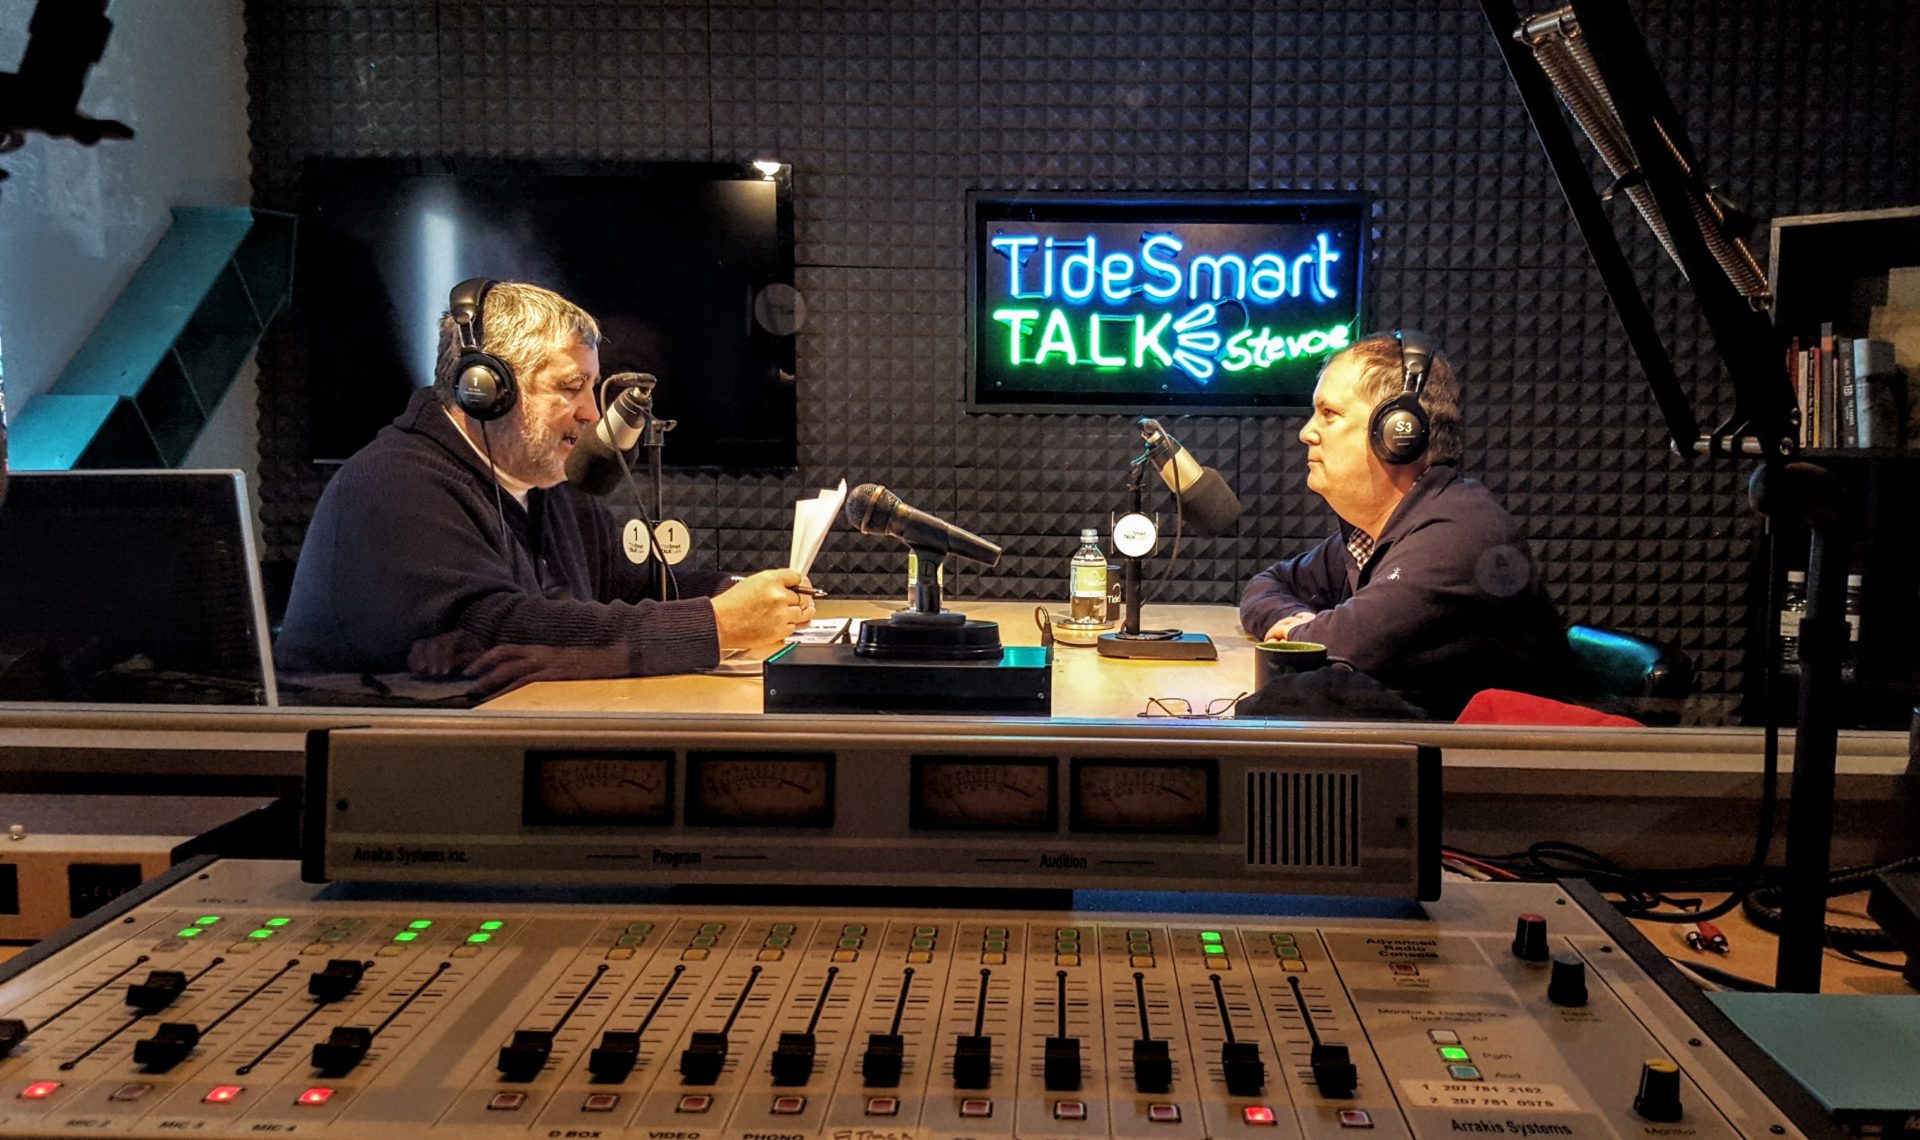 Host of TideSmart Talk with Stevoe, Steve Woods, welcomed author of Appalachian Odyssey, Jeff Ryan (at right).